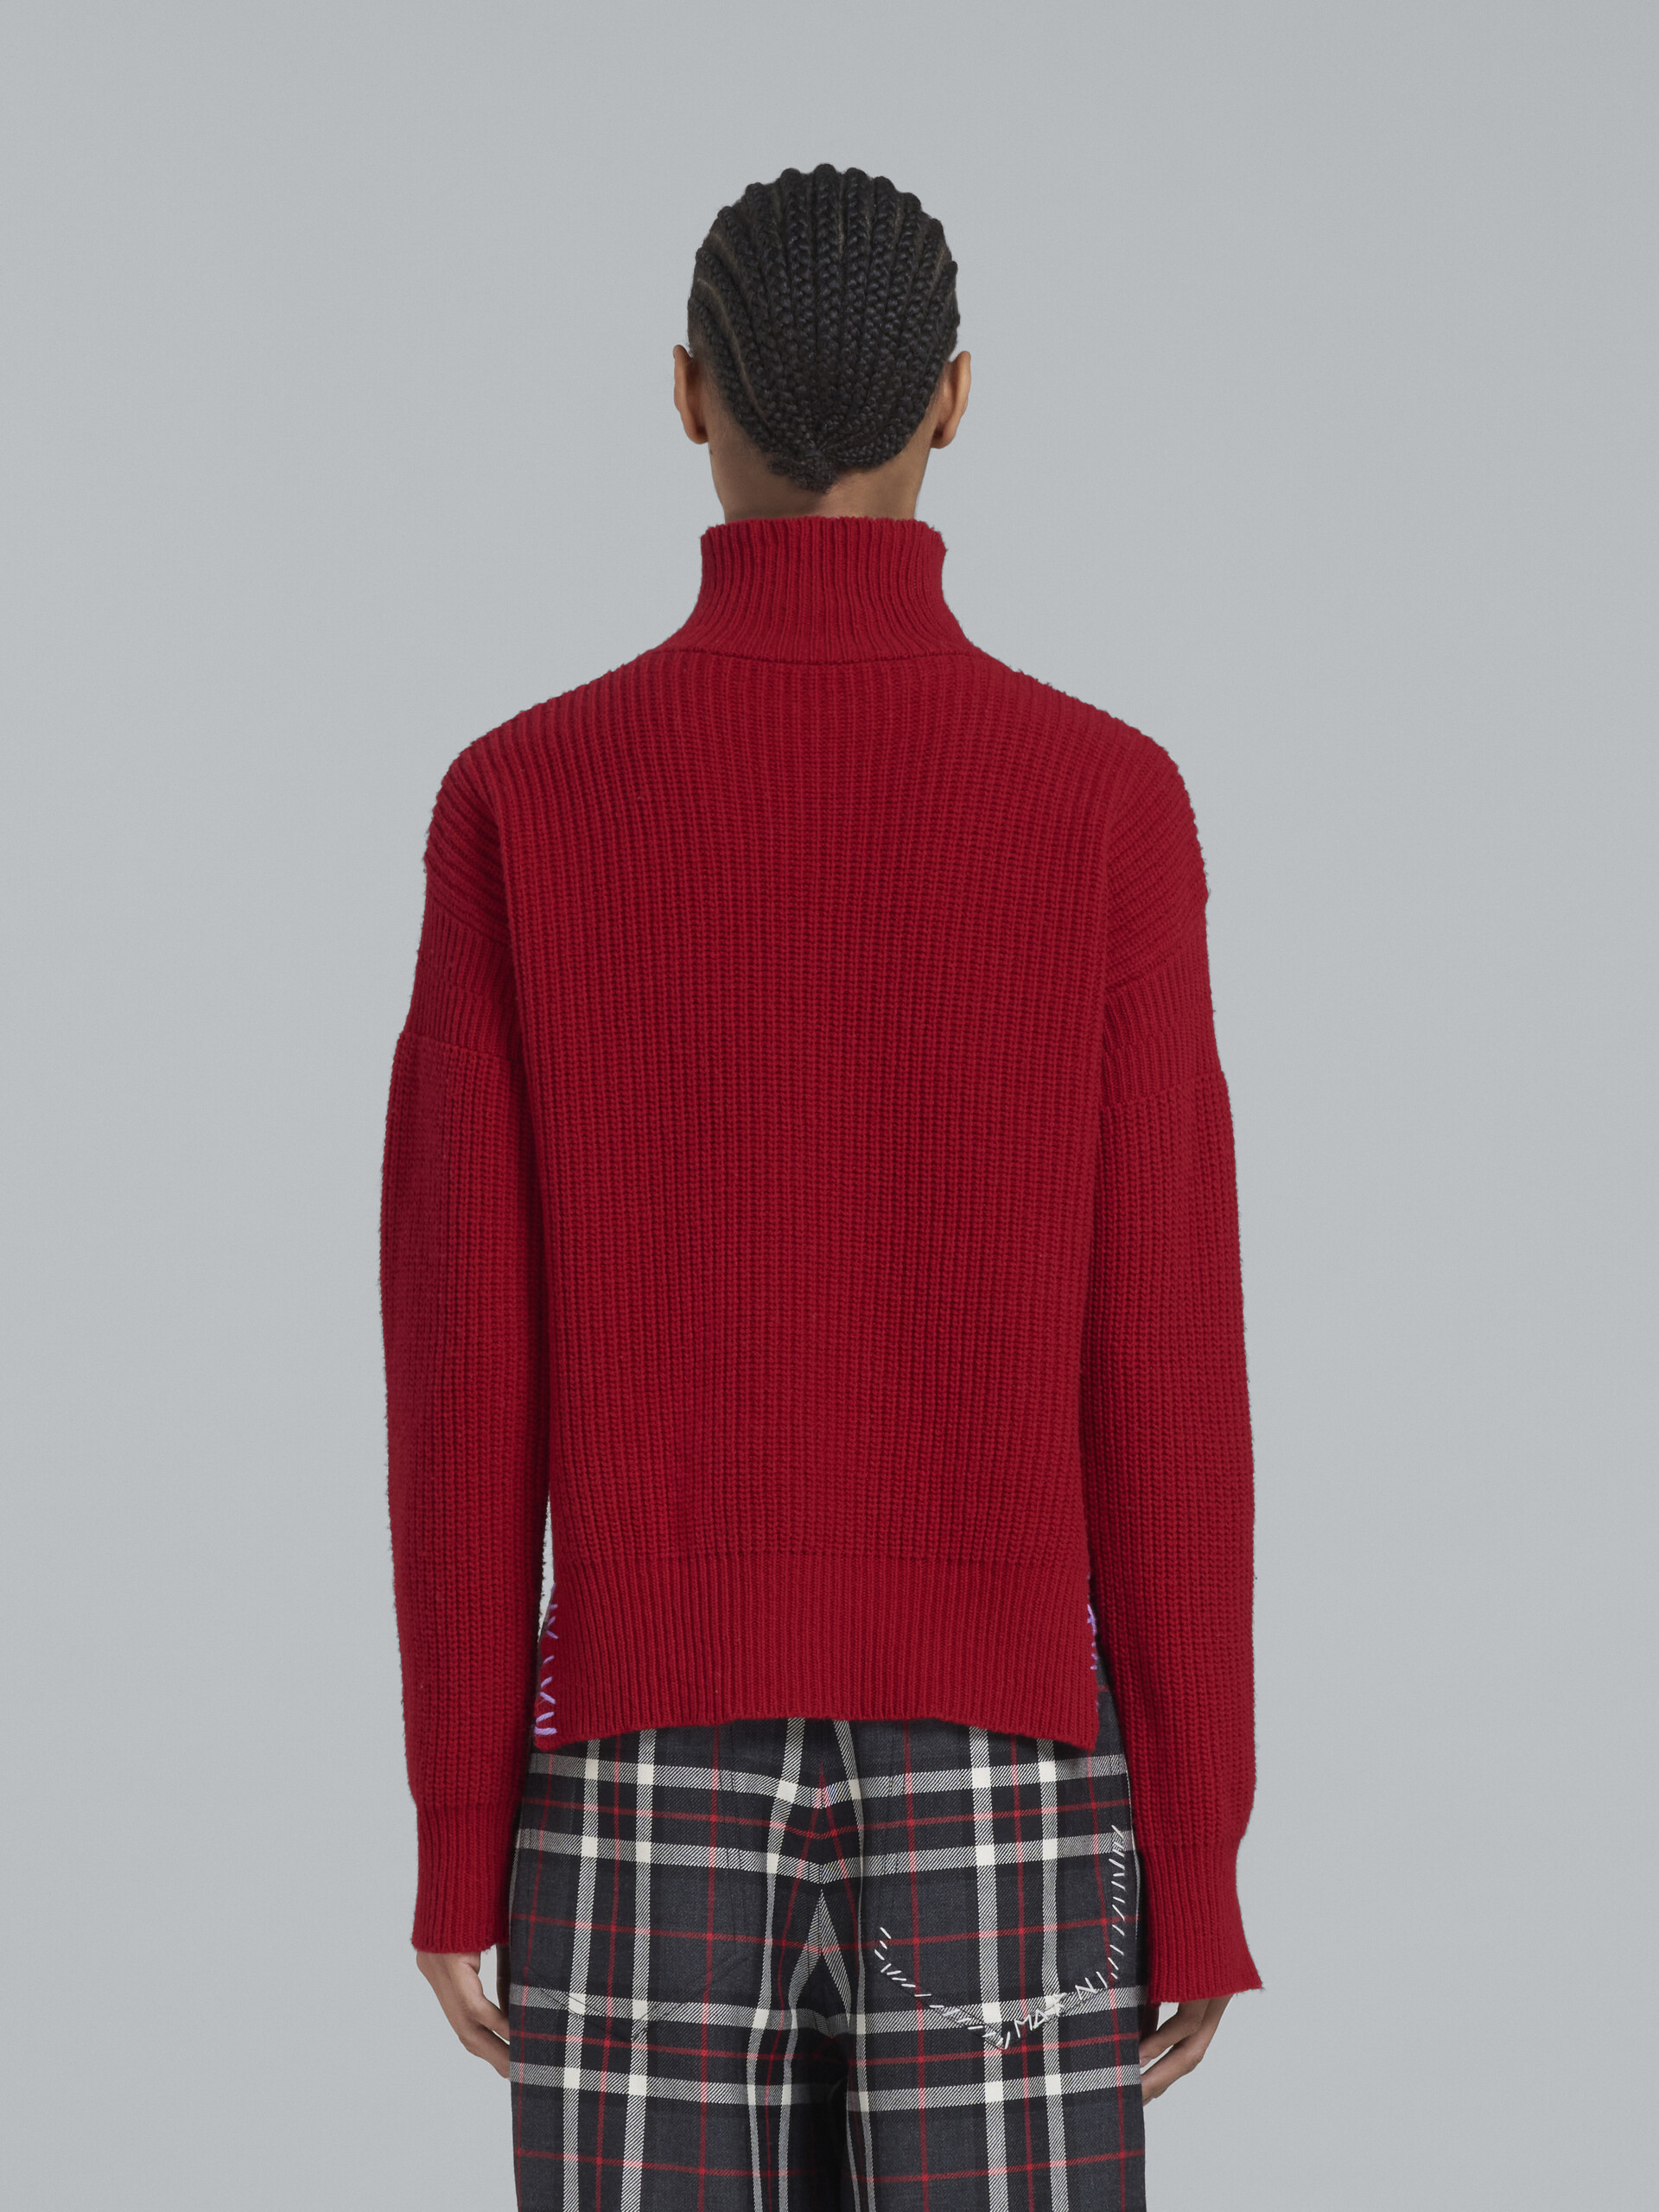 Red turtleneck sweater with raw-edge detailing - Pullovers - Image 3